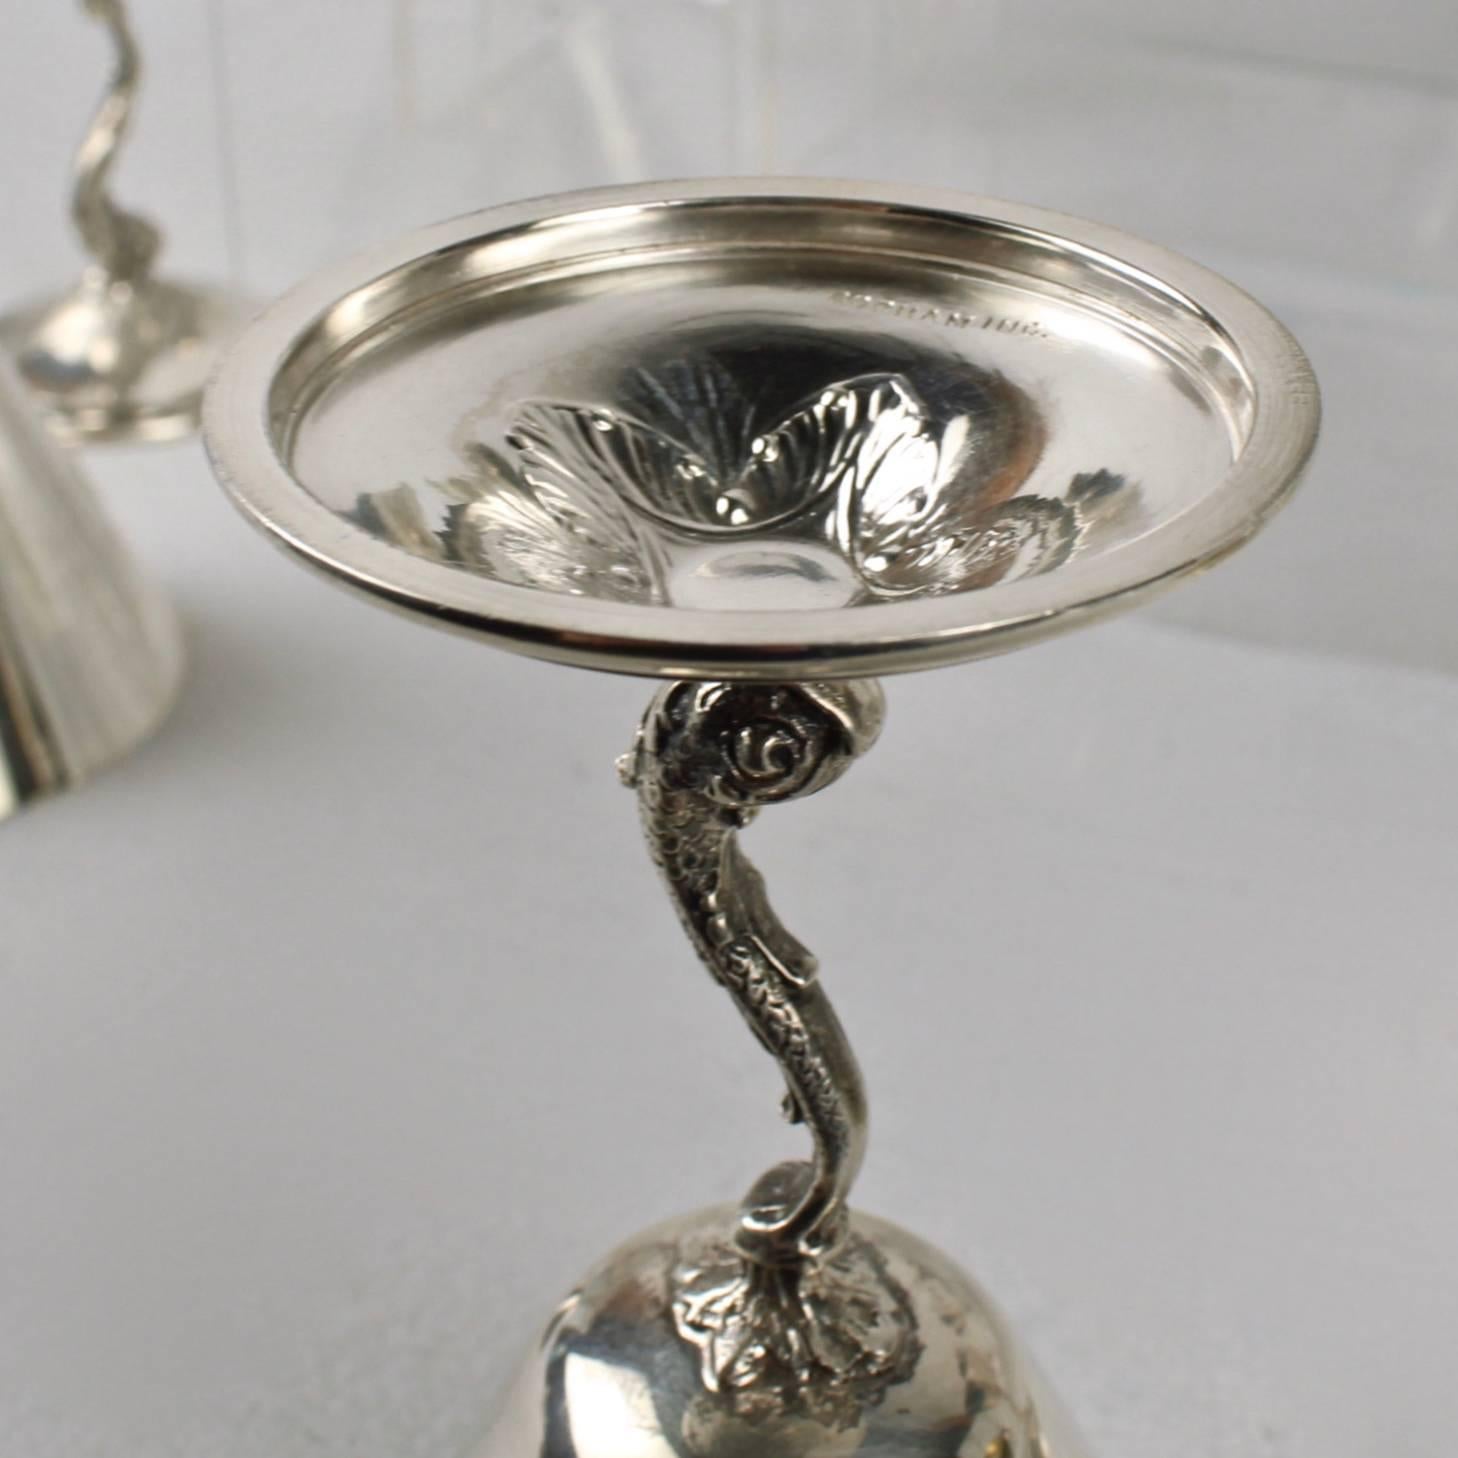 12 Gorham Art Deco Sterling Silver Dolphin Martini Goblets or Cocktail Stems 1